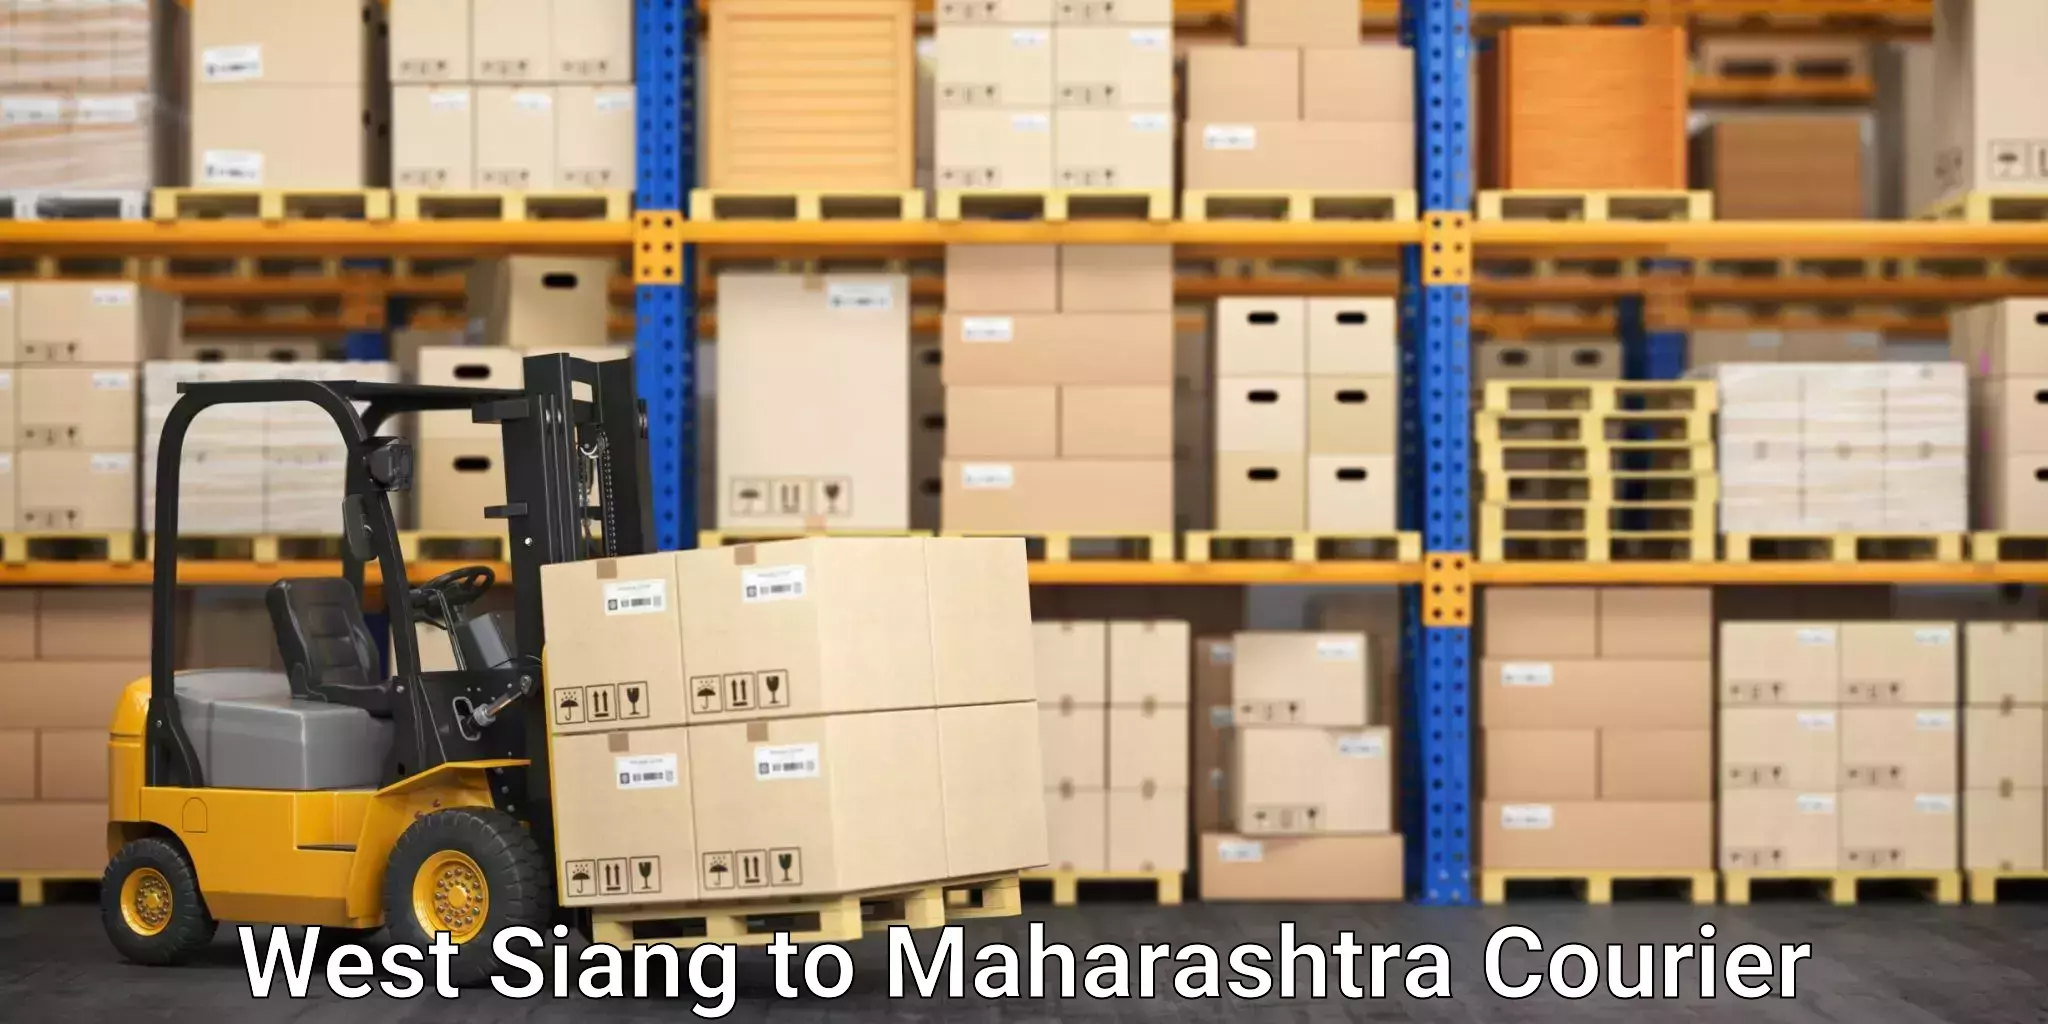 Online shipping calculator West Siang to Andheri